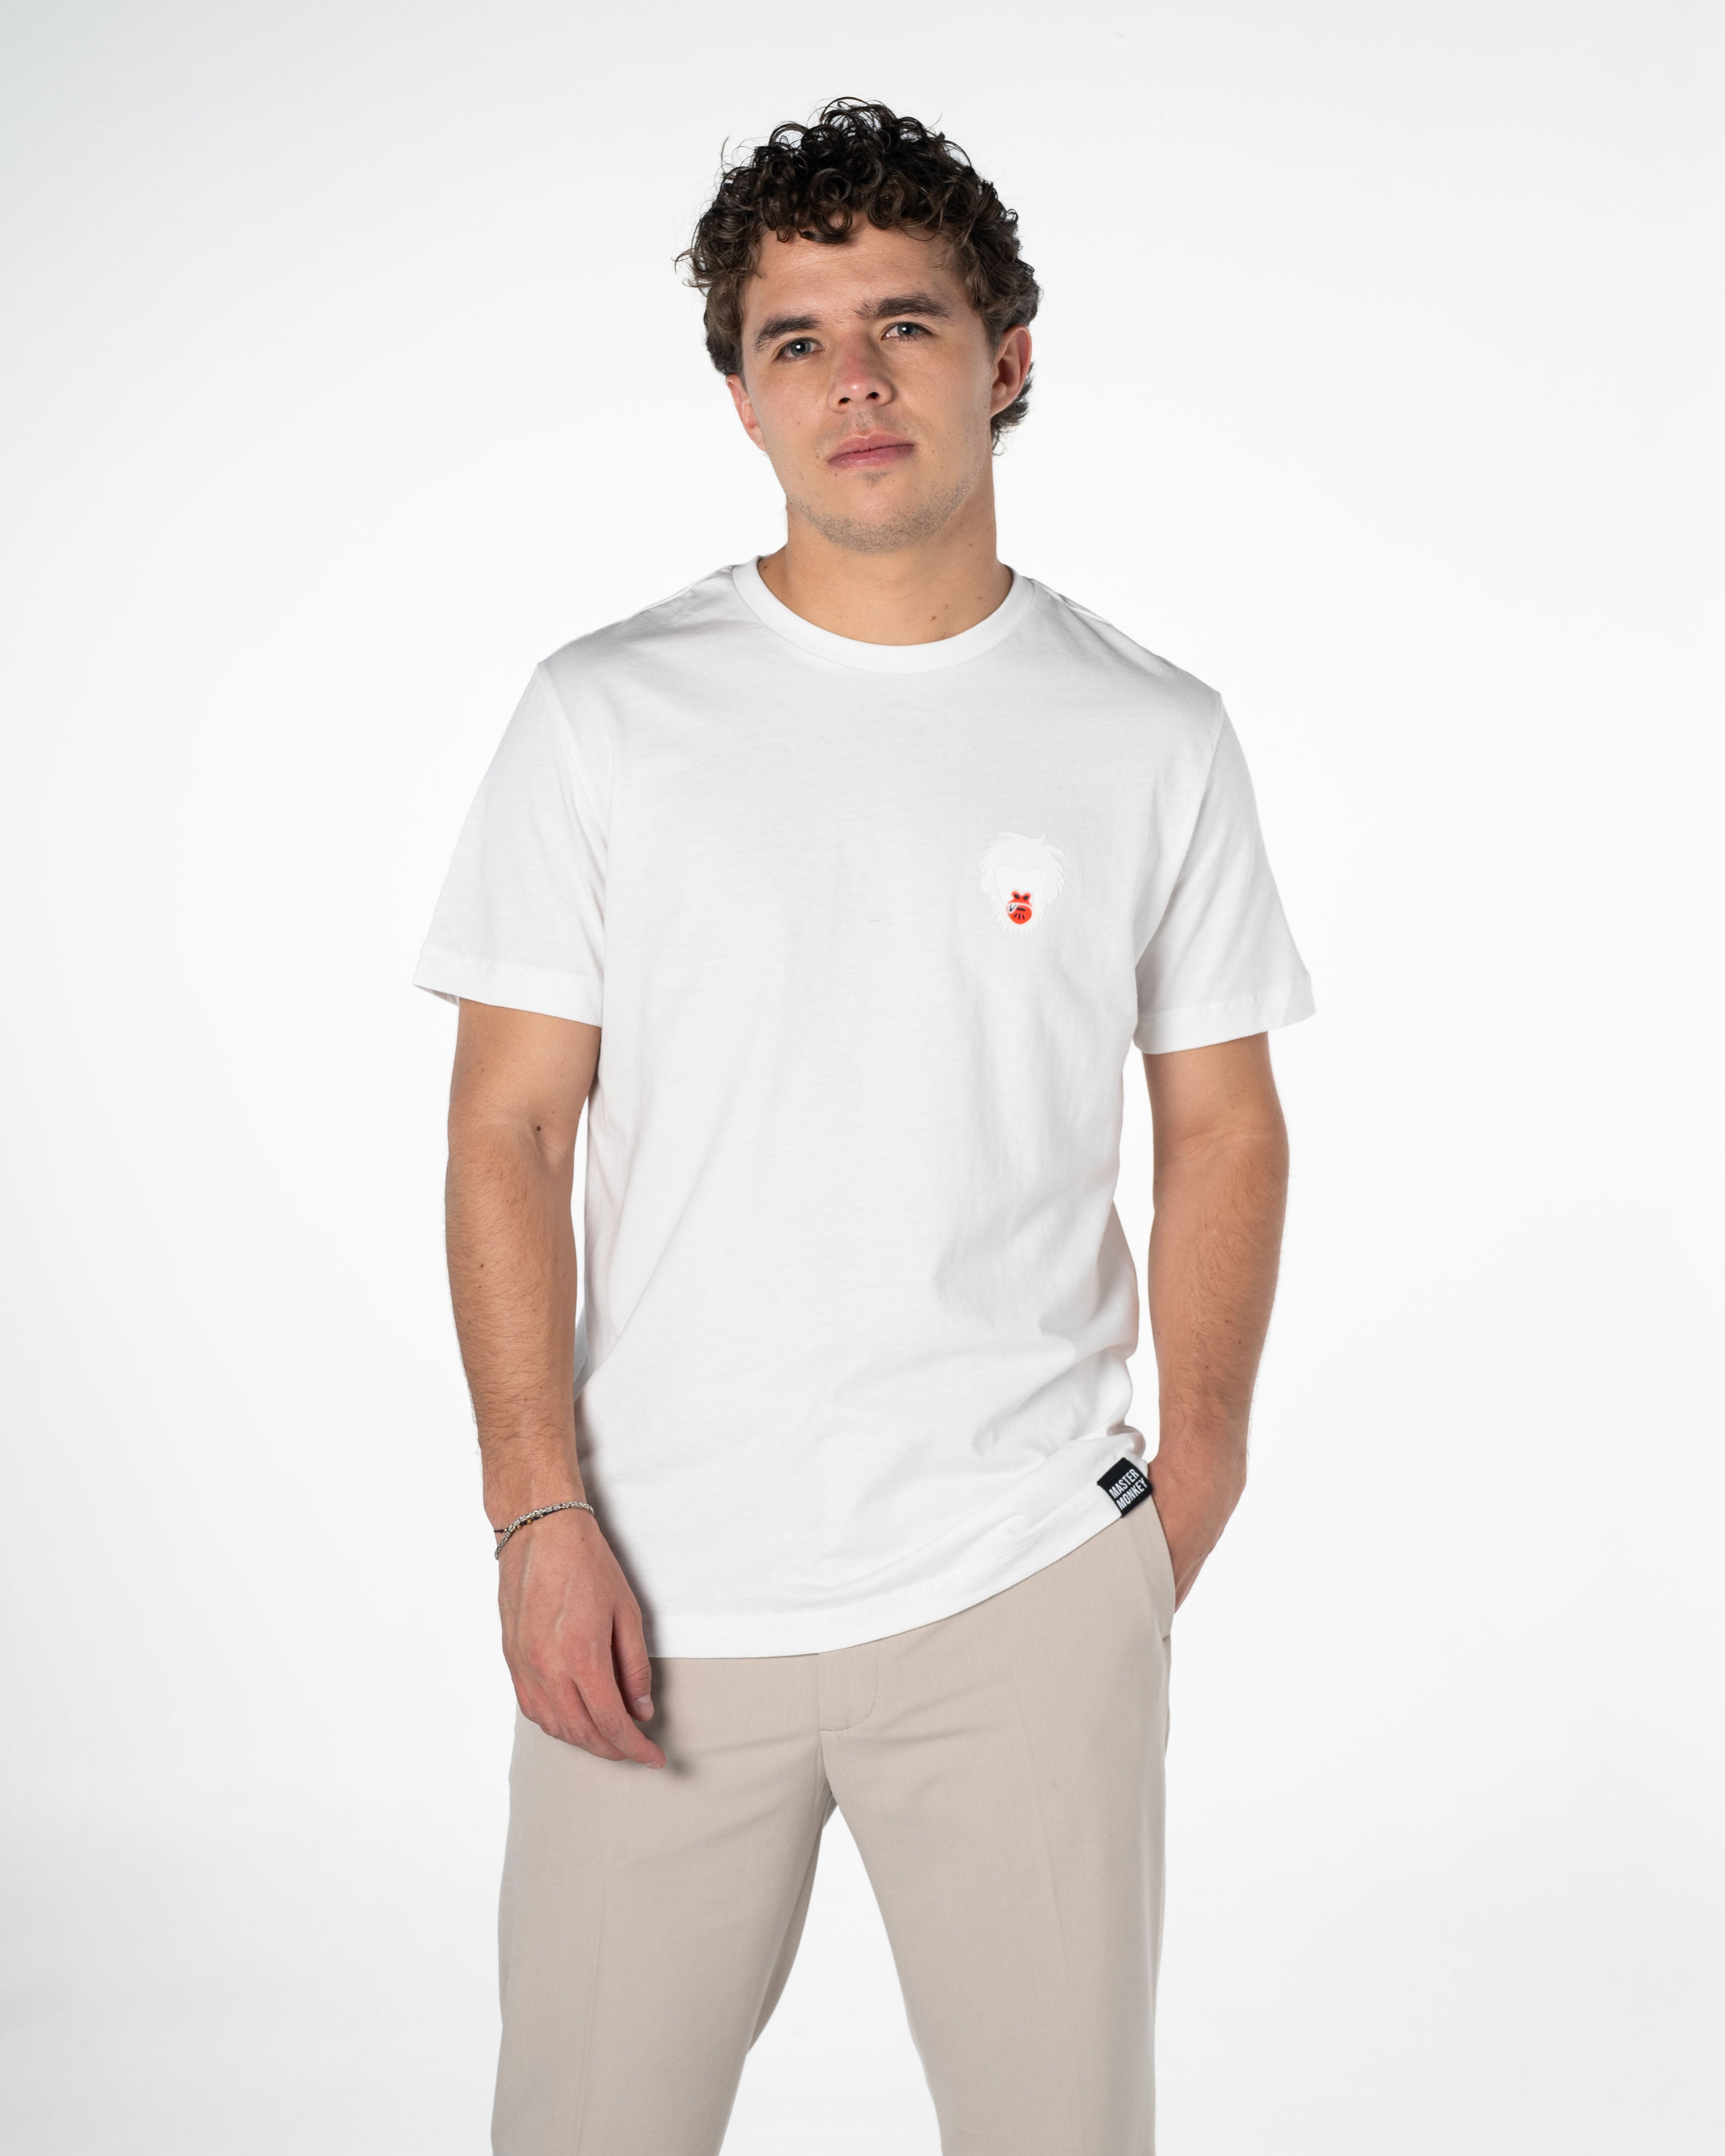 30% OFF Playera Algodón Hombre T-shirt Ghost Collection